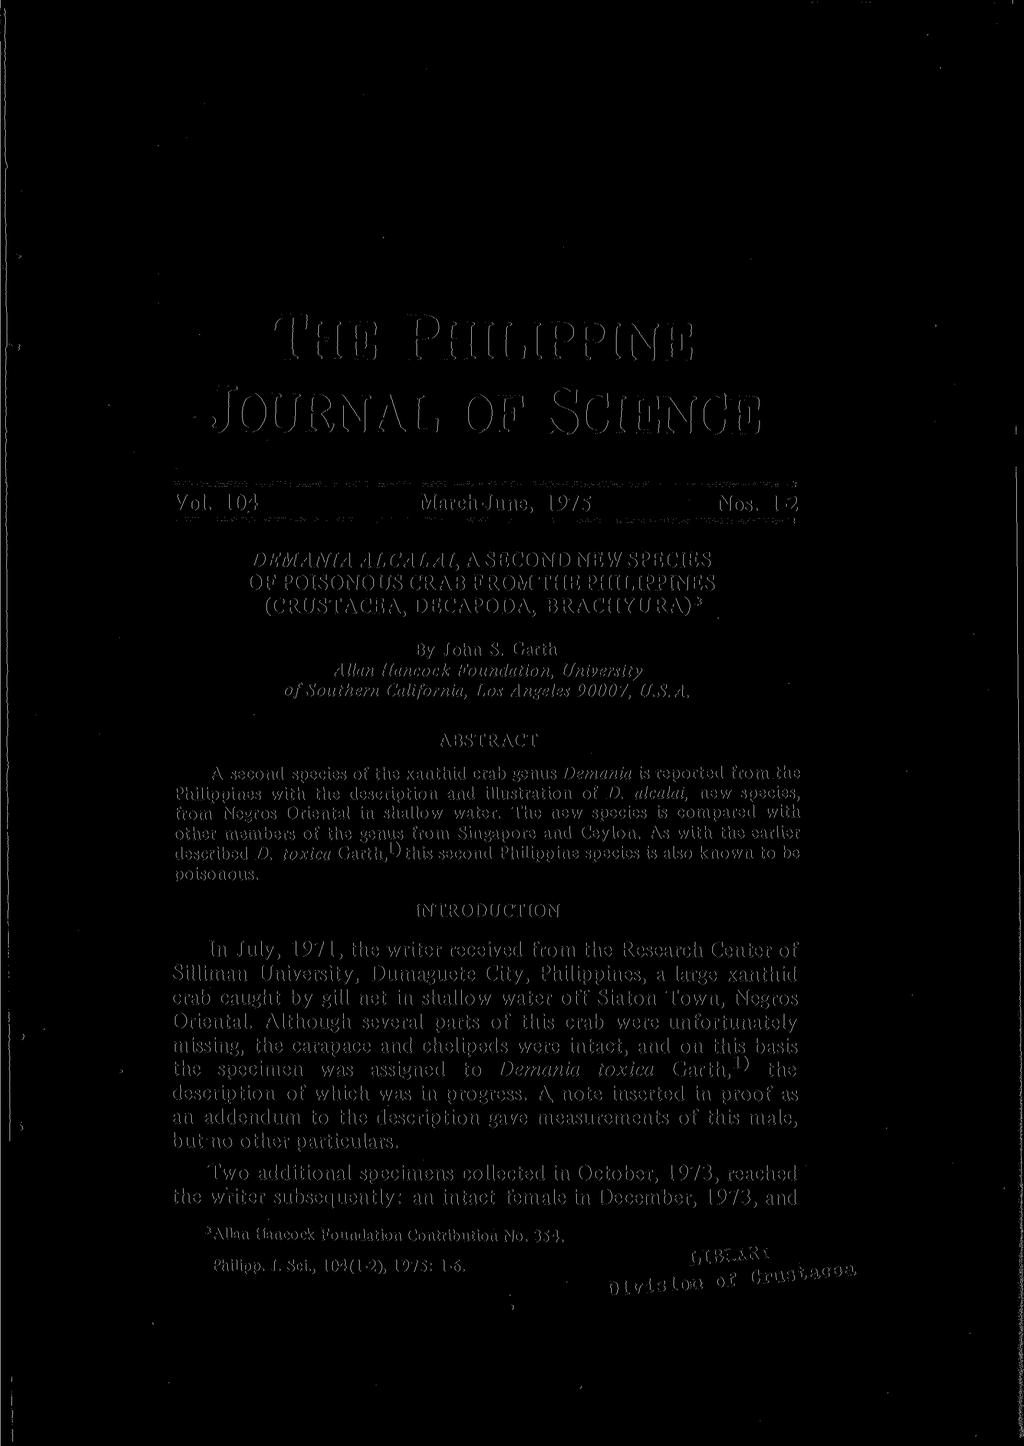 THE PHILIPPINE JOURNAL OF SCIENCE Vol. 104 March-June, 1975 Nos. 1-2 DEMANIA ALCALAI, A SECOND NEW SPECIES OF POISONOUS CRAB FROM THE PHILIPPINES (CRUSTACEA, DECAPODA, BRACHYURA)* By John S.